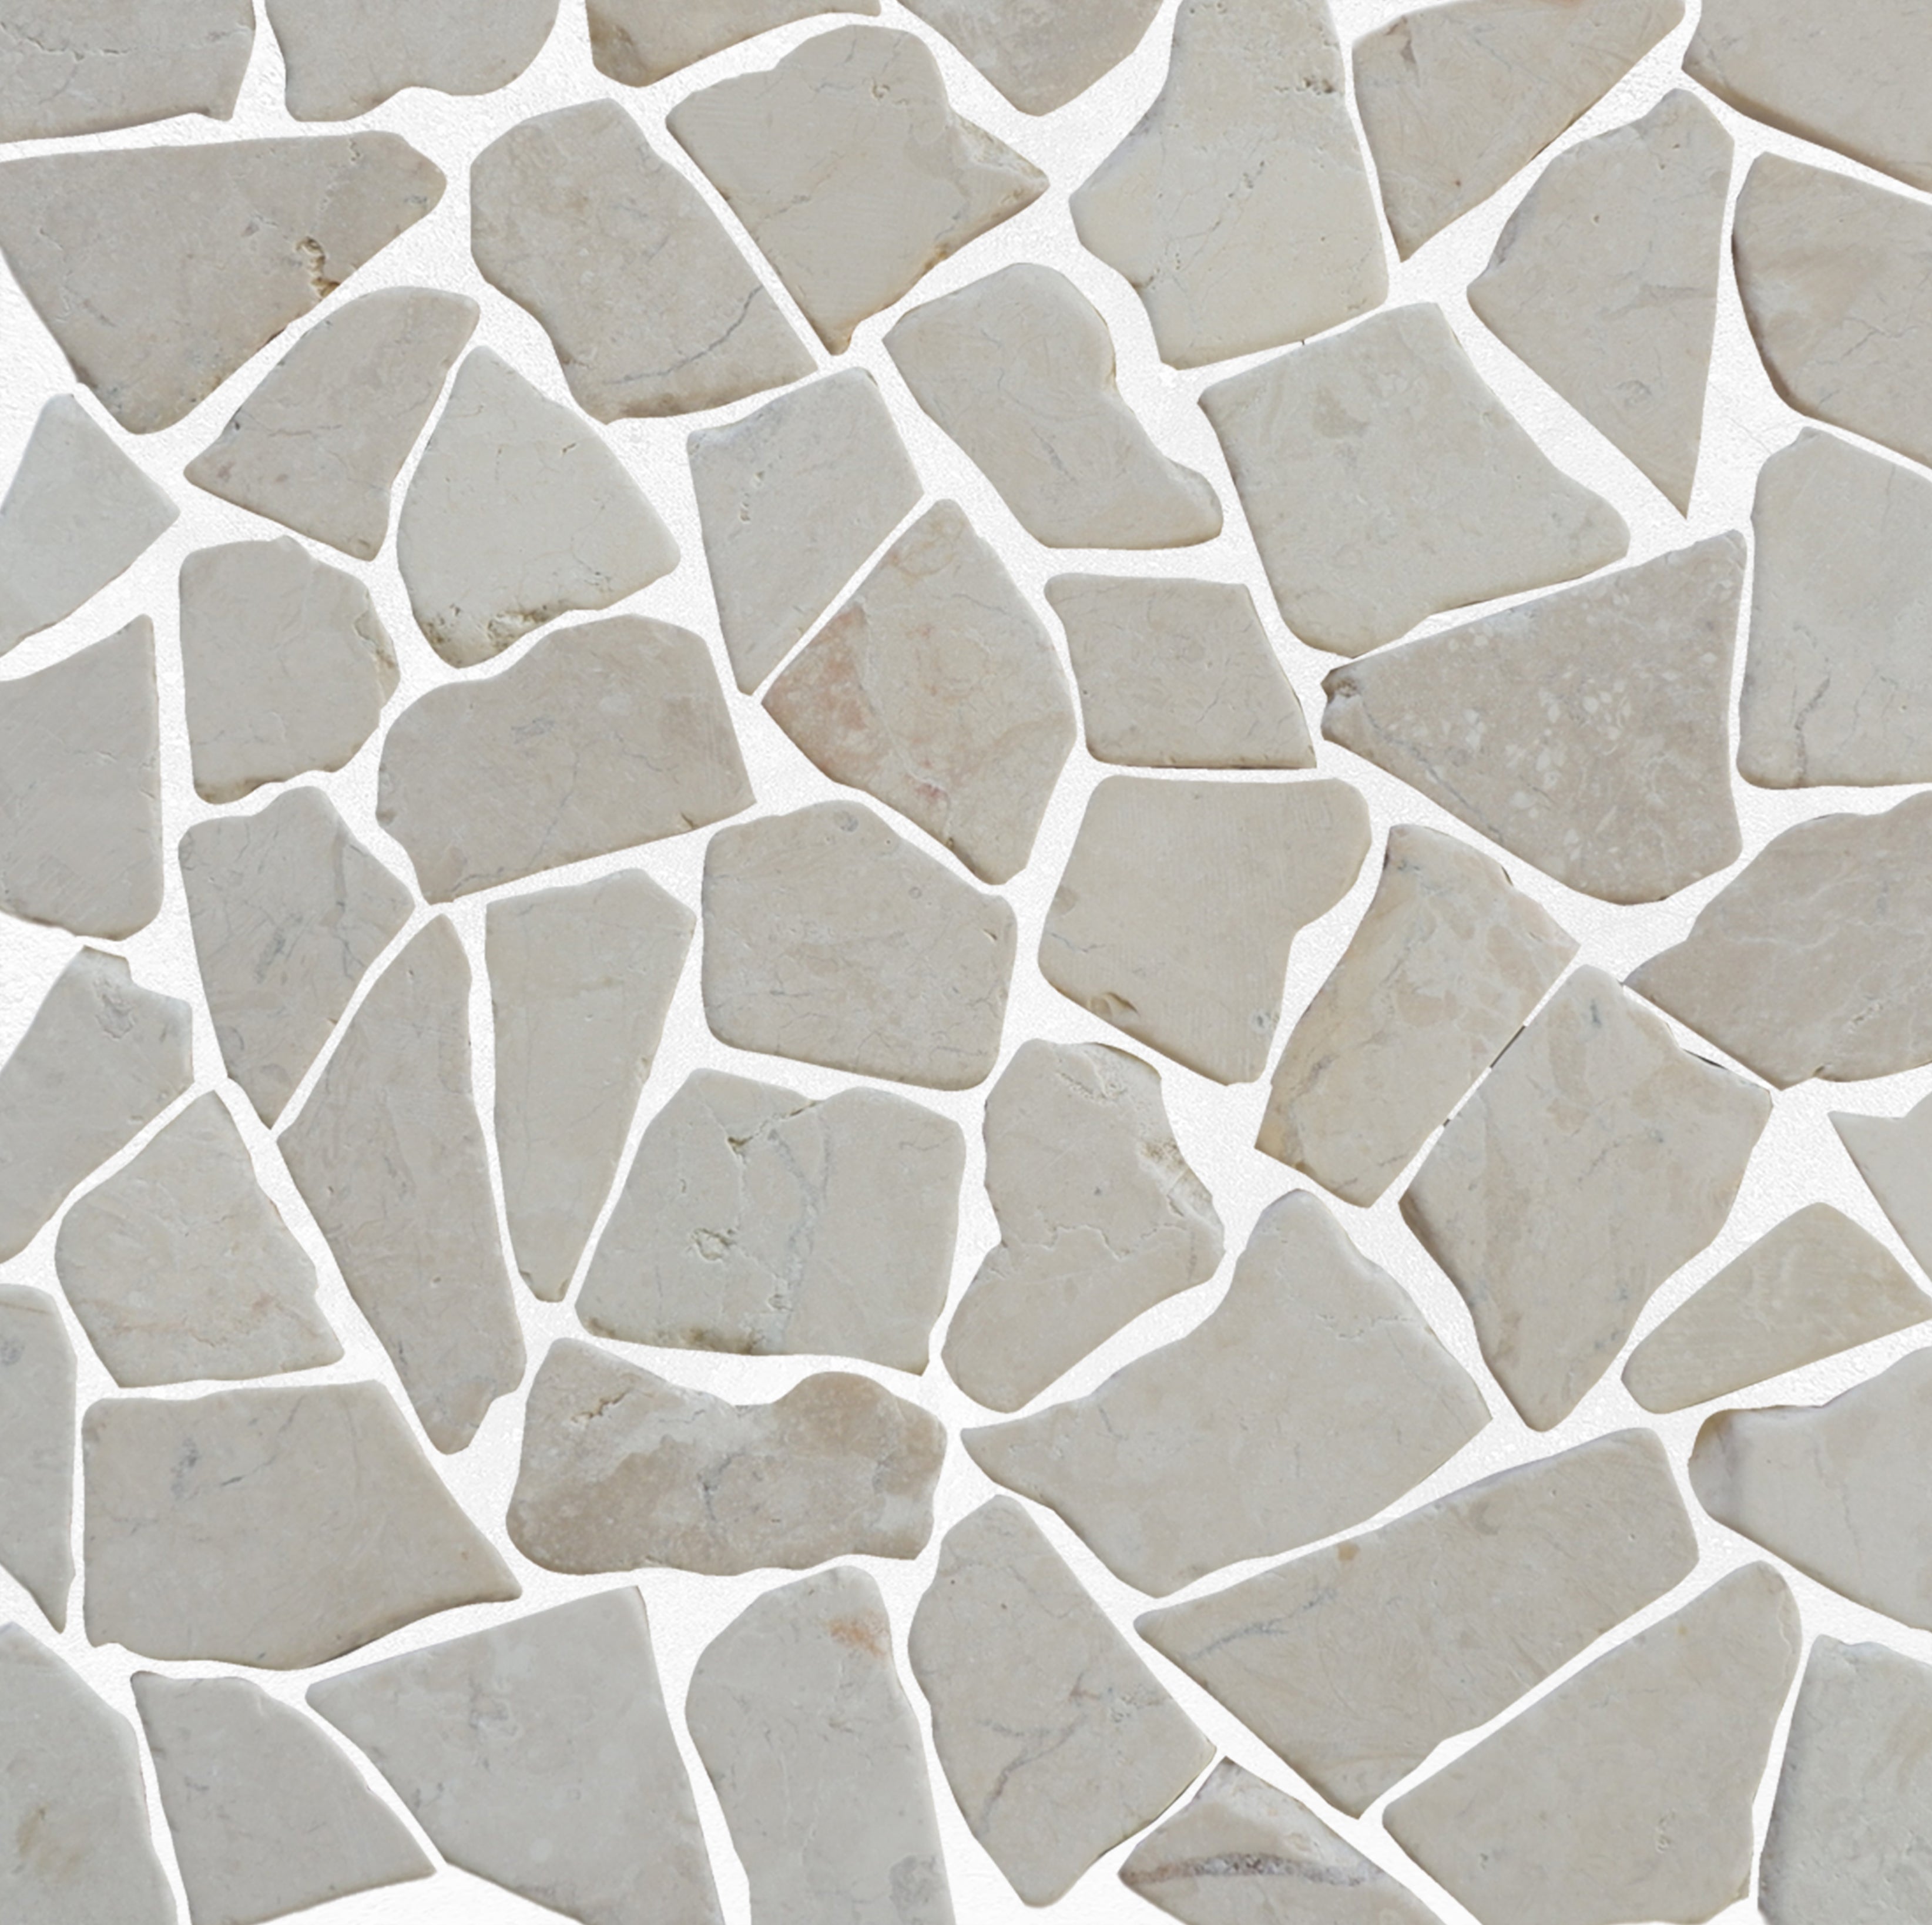 Alpen white random tile sample close up with grout